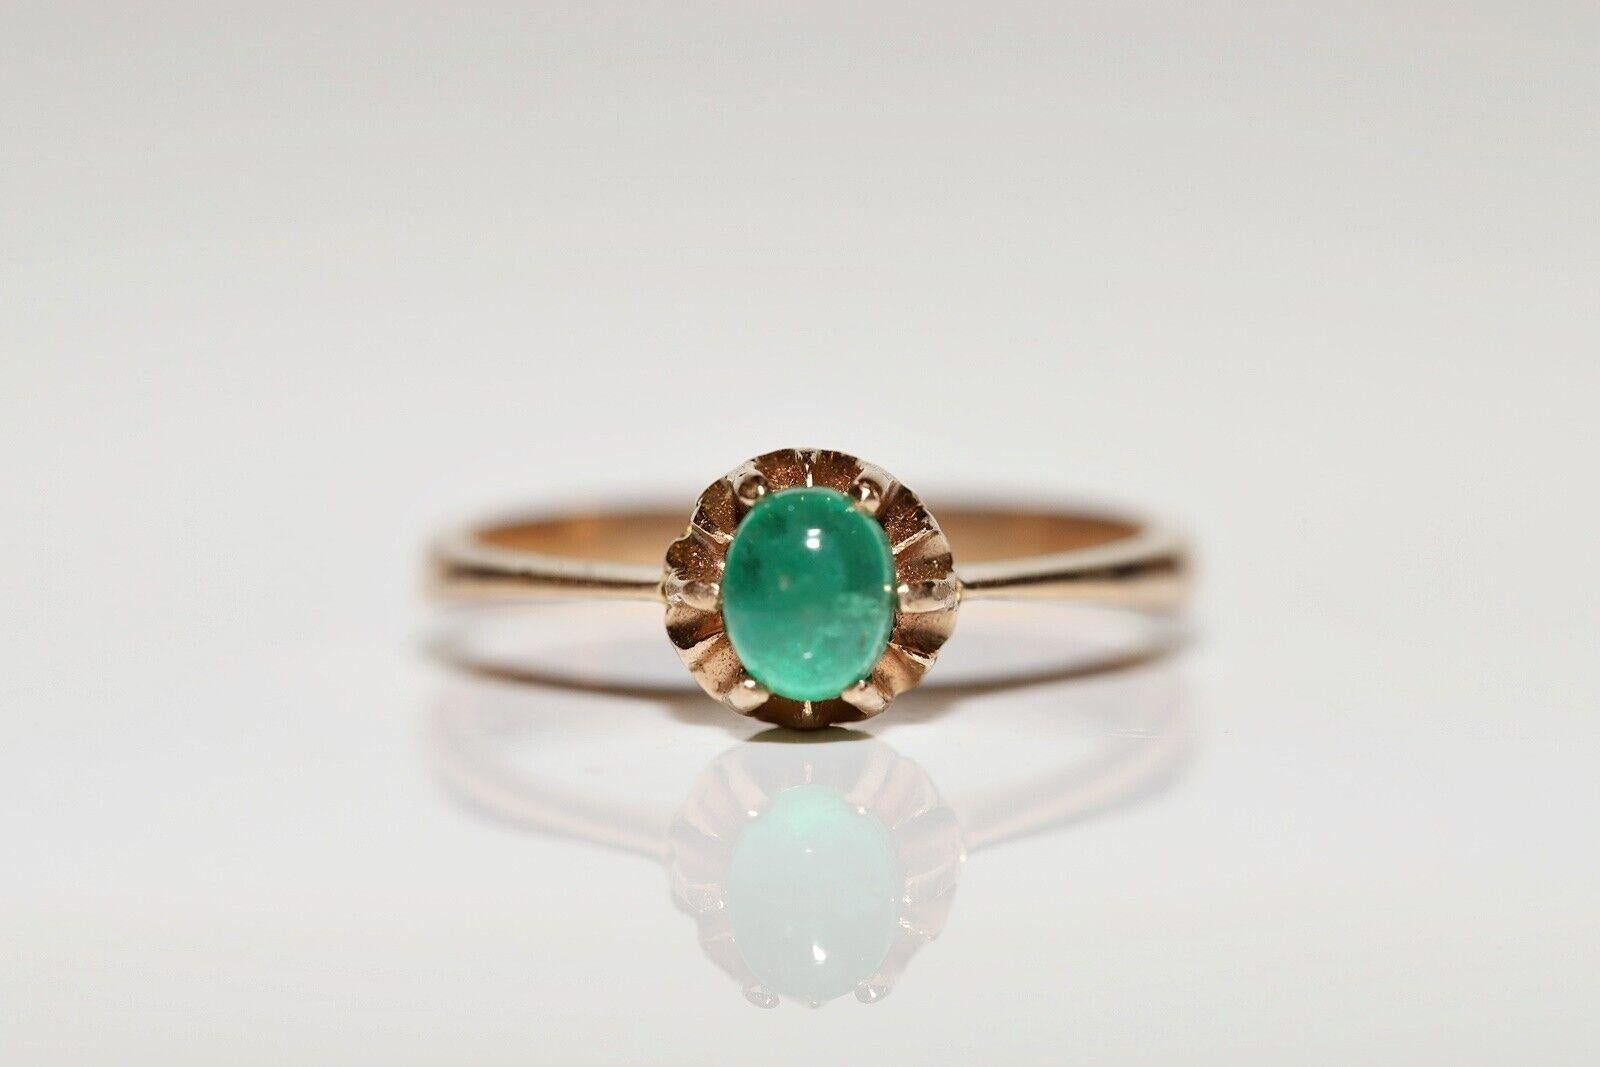 Women's Antique Circa 1900s 14k Gold Natural Cabochon Emerald Solitaire Ring For Sale